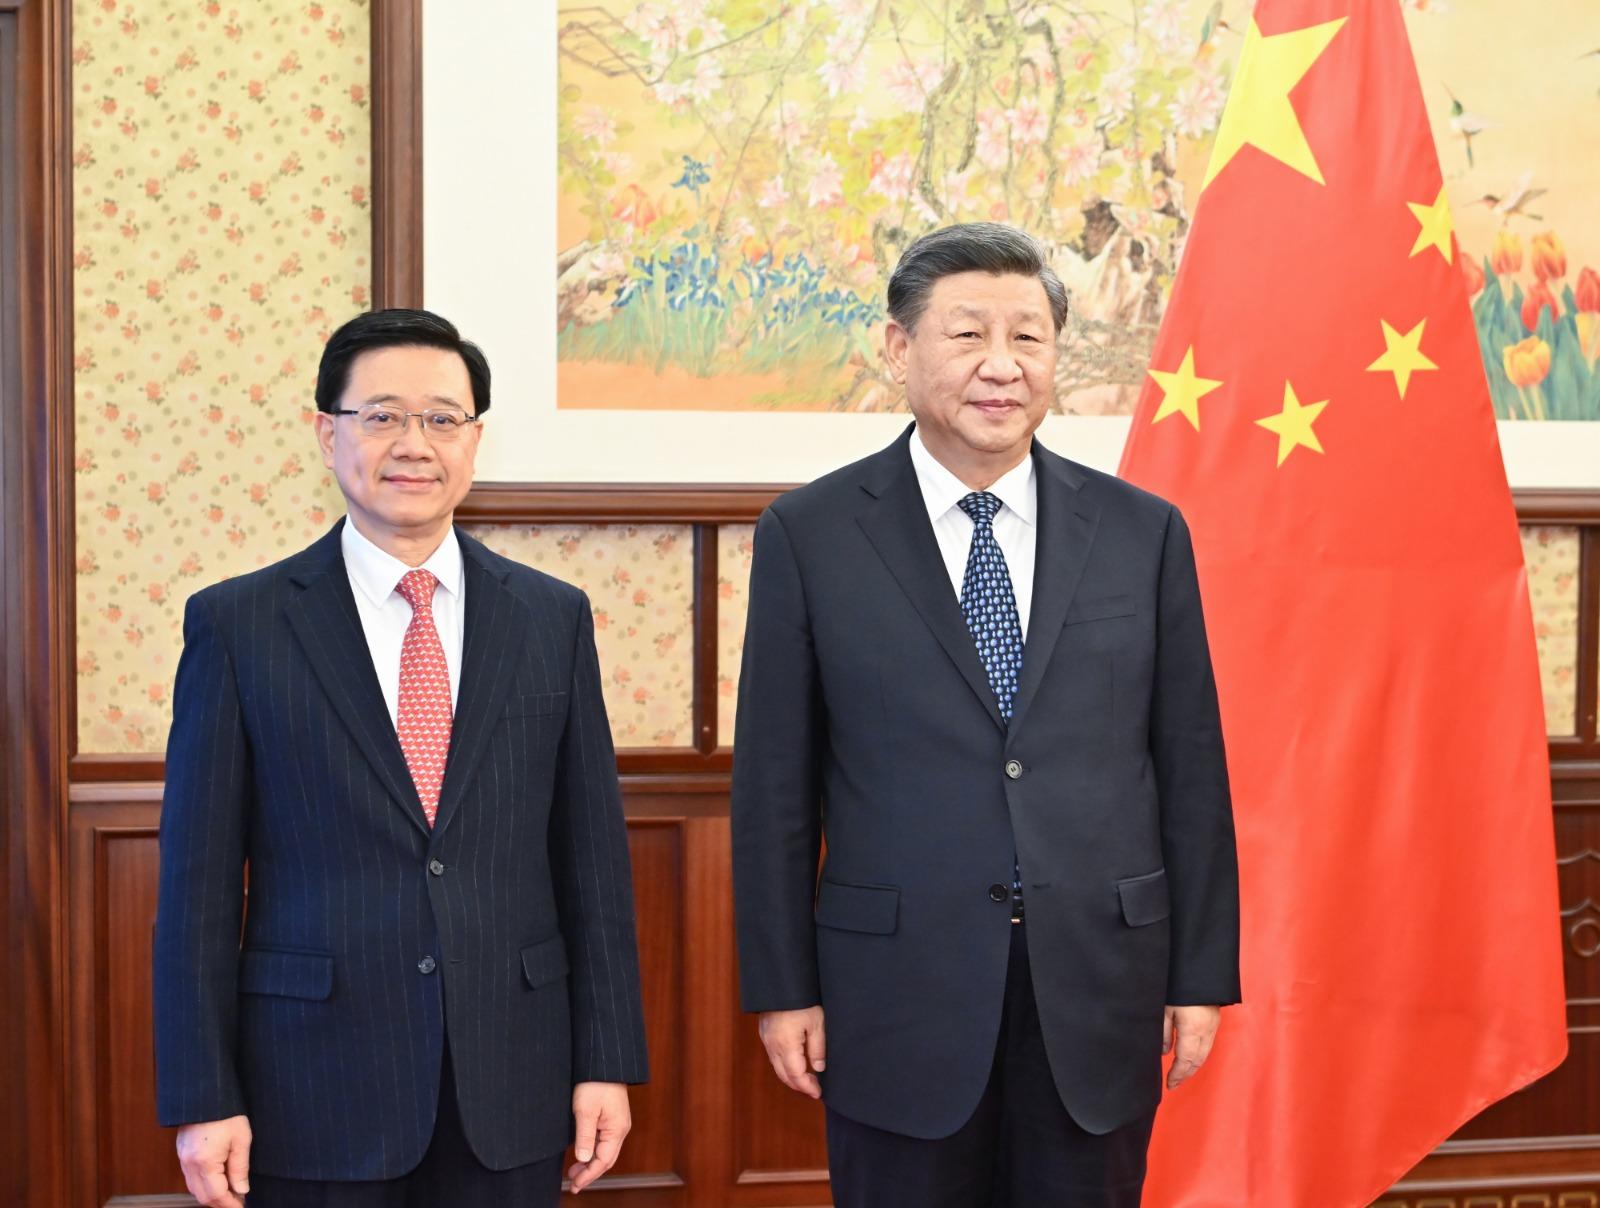 The Chief Executive, Mr John Lee (left), briefed President Xi Jinping in Beijing today (December 23) on the latest economic, social and political situation in Hong Kong. They are pictured before the meeting.